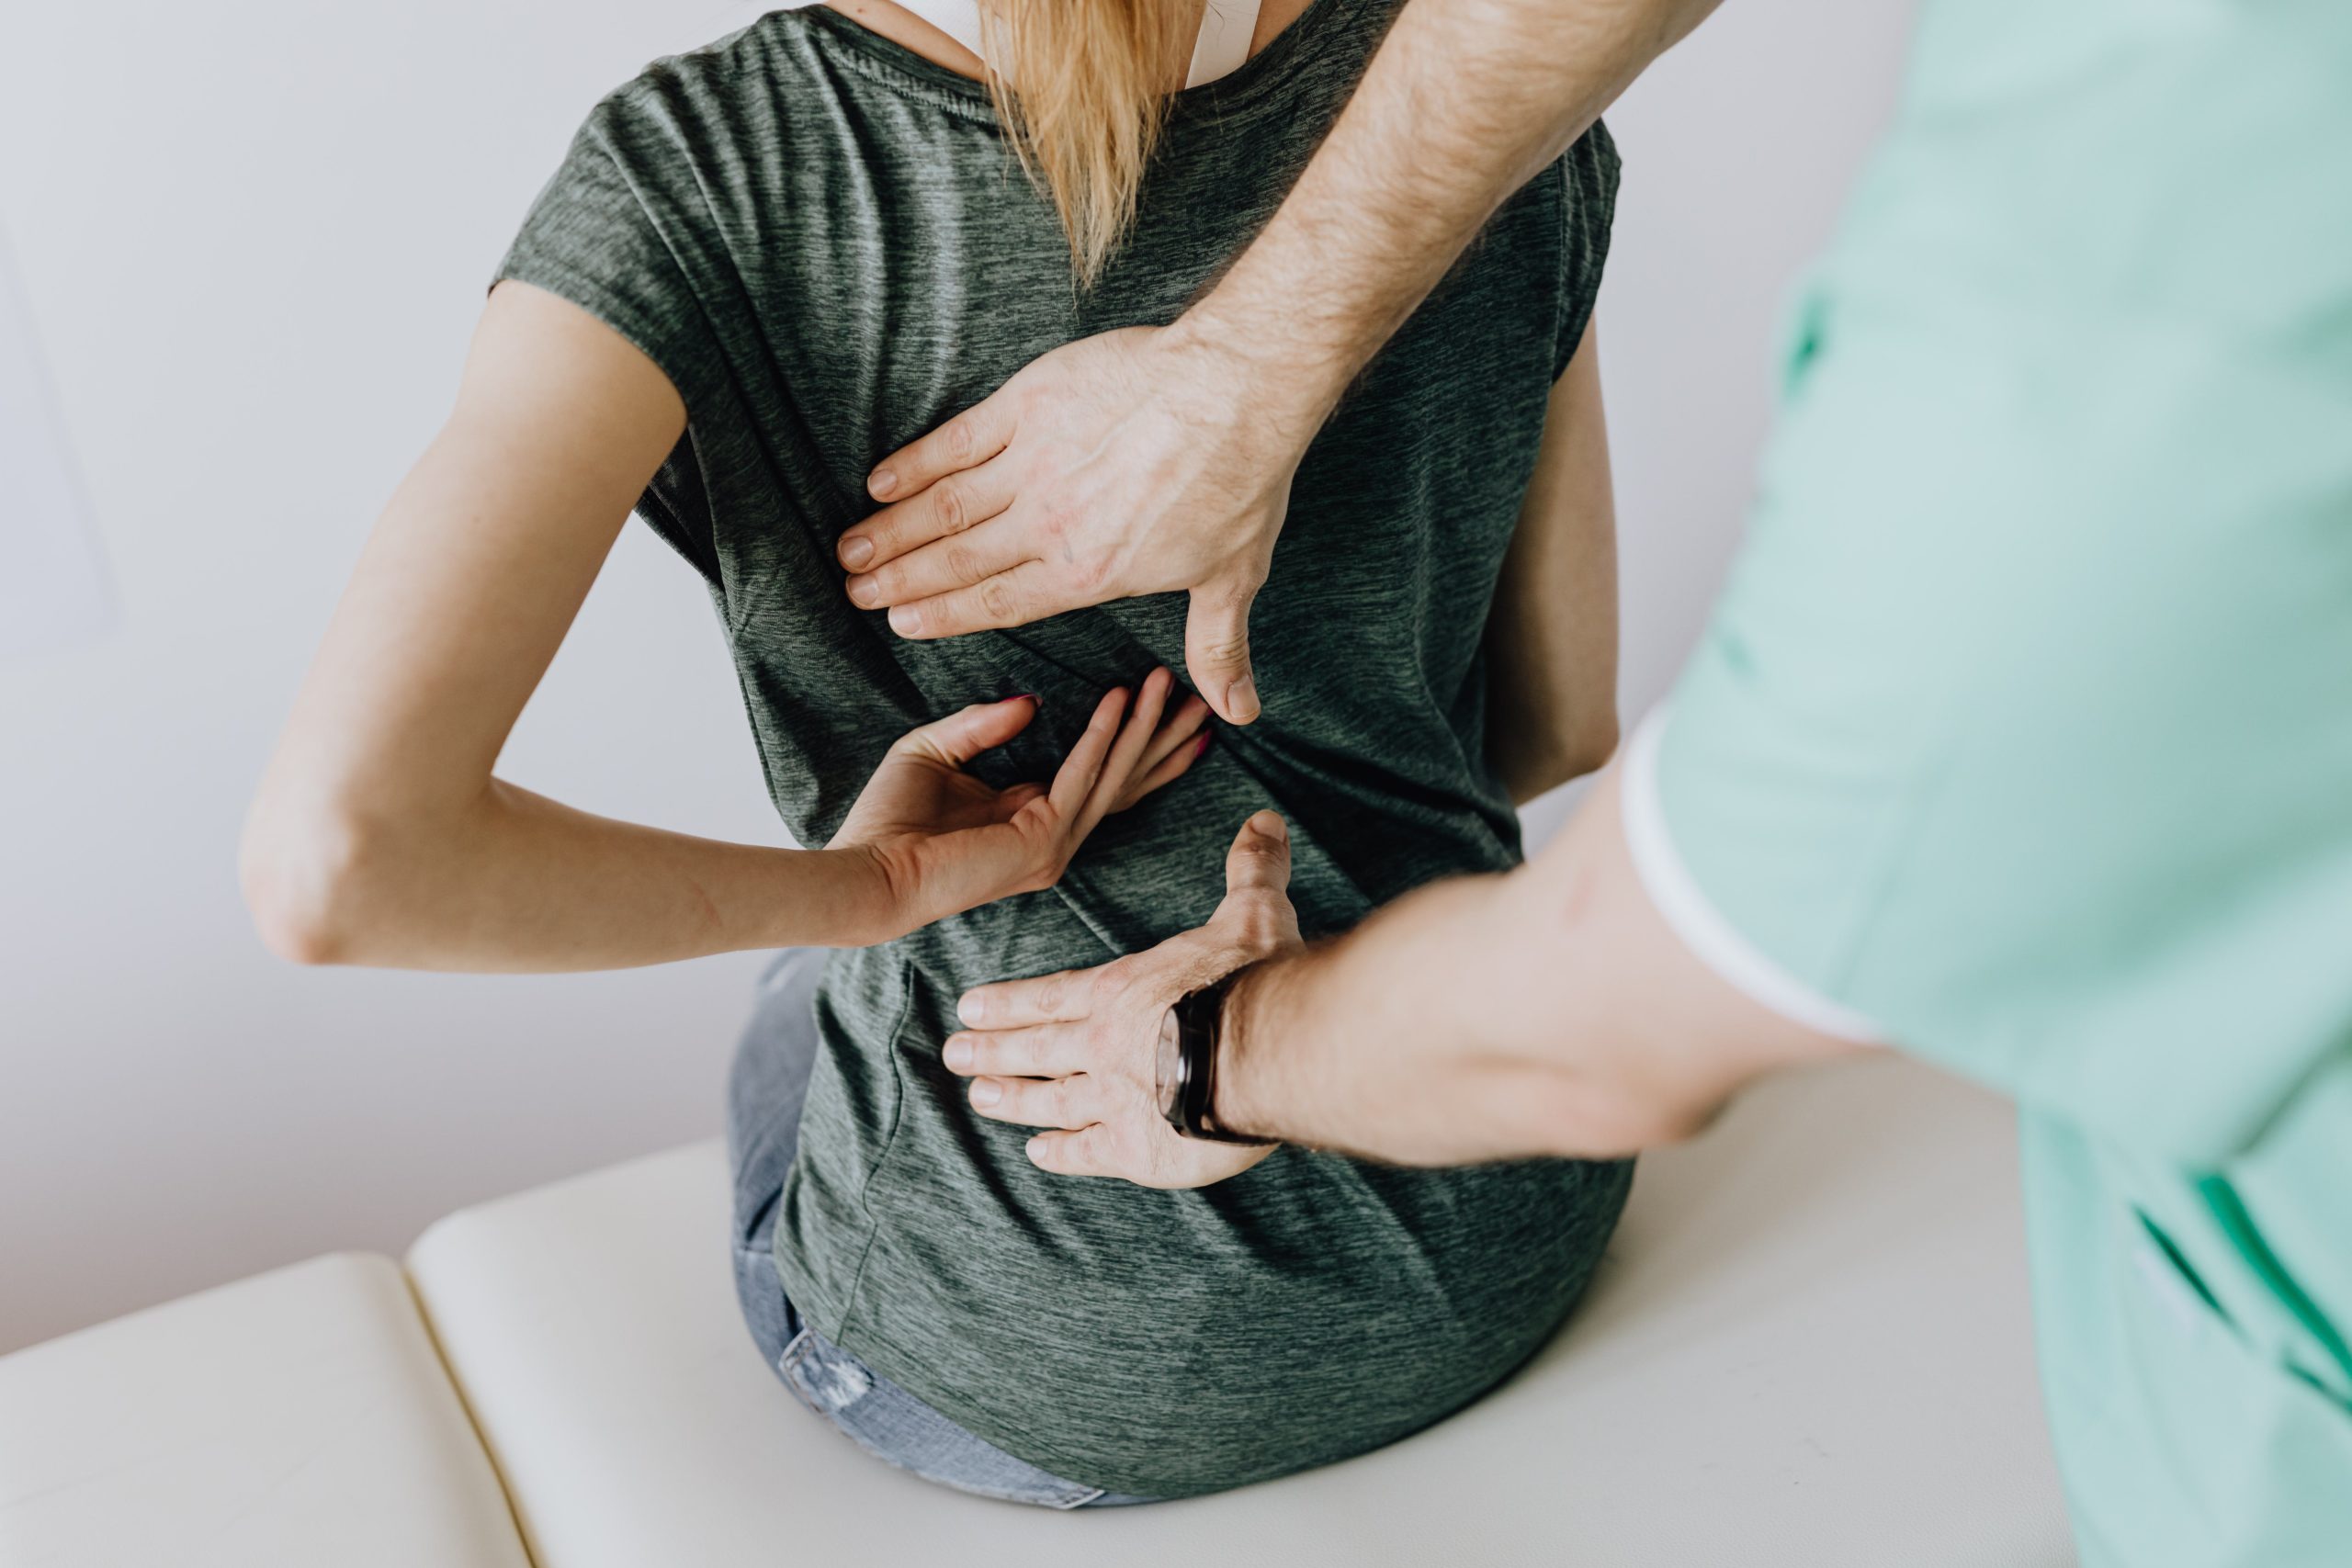 This picture depicts a person getting an adjustment with a chiropractor which is one of the many ways in which to better manage pain.